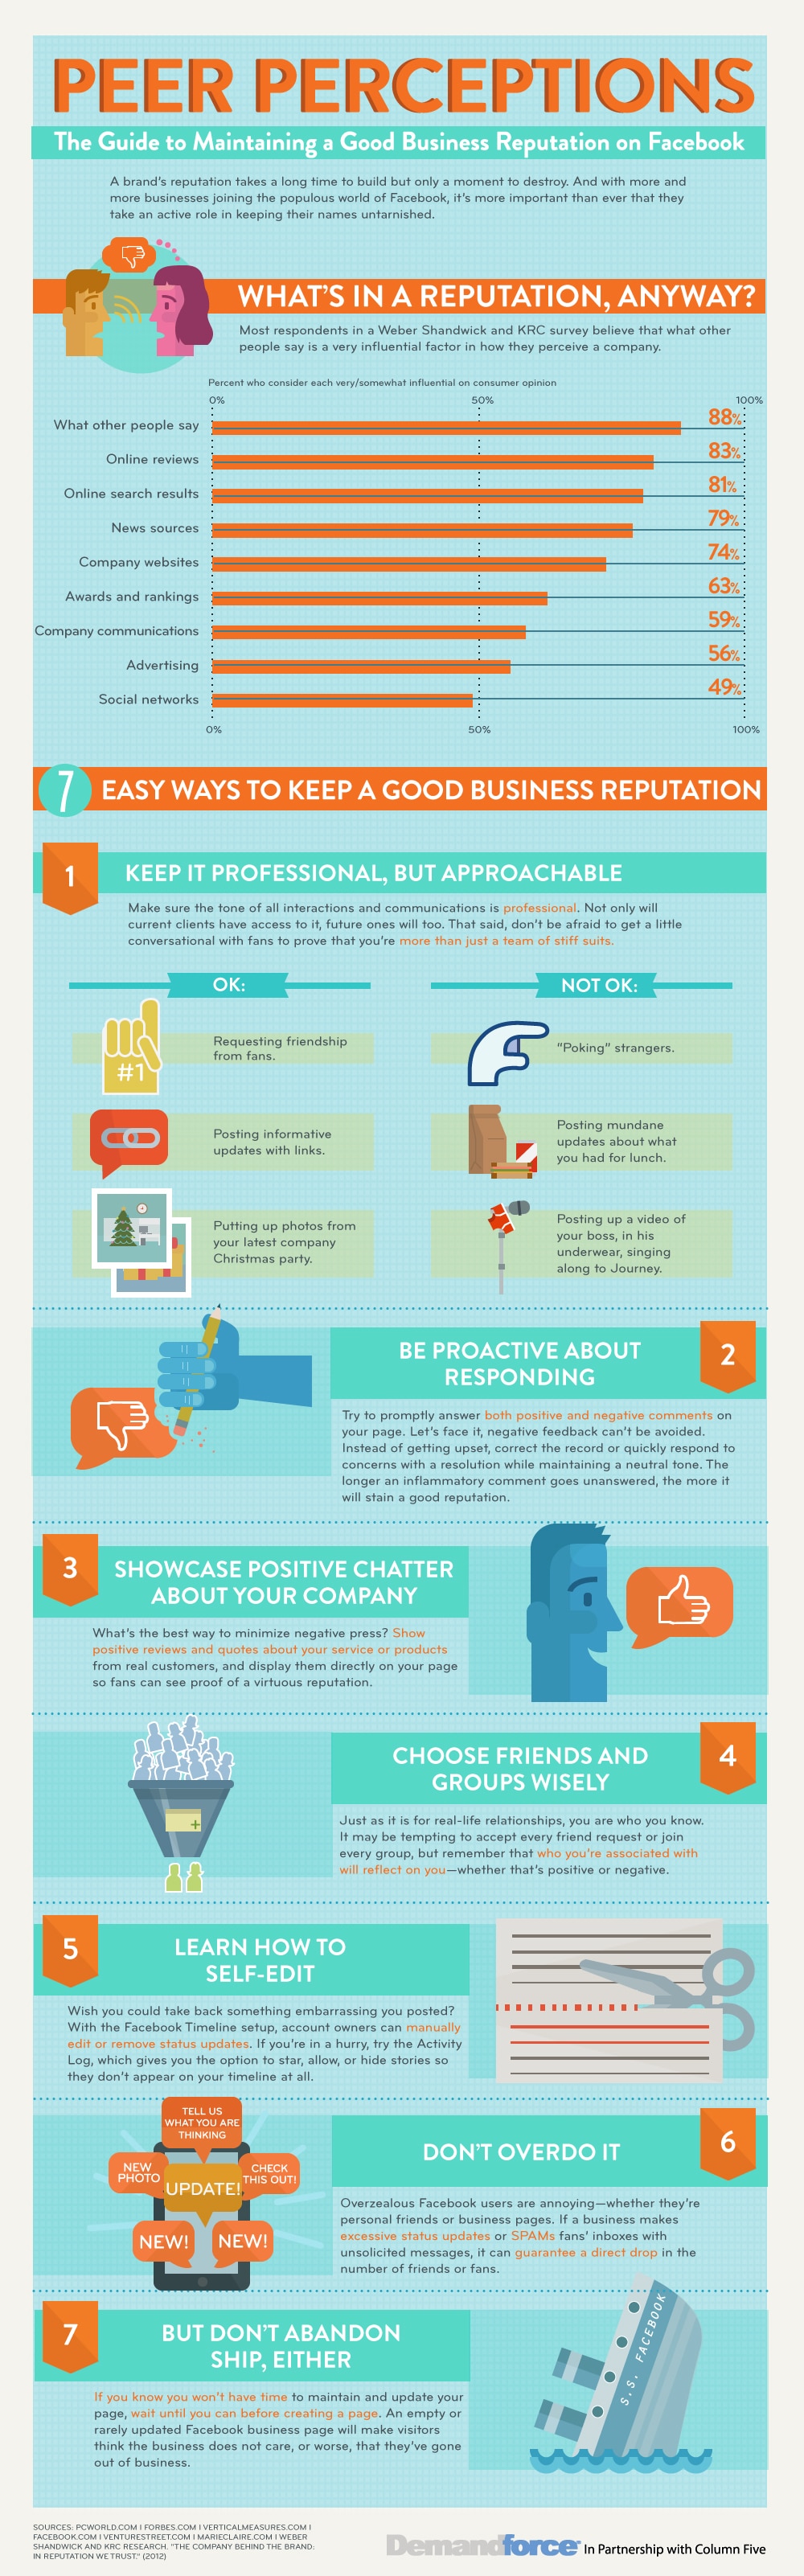 How To Keep A Good Business Reputation On Facebook [Infographic]